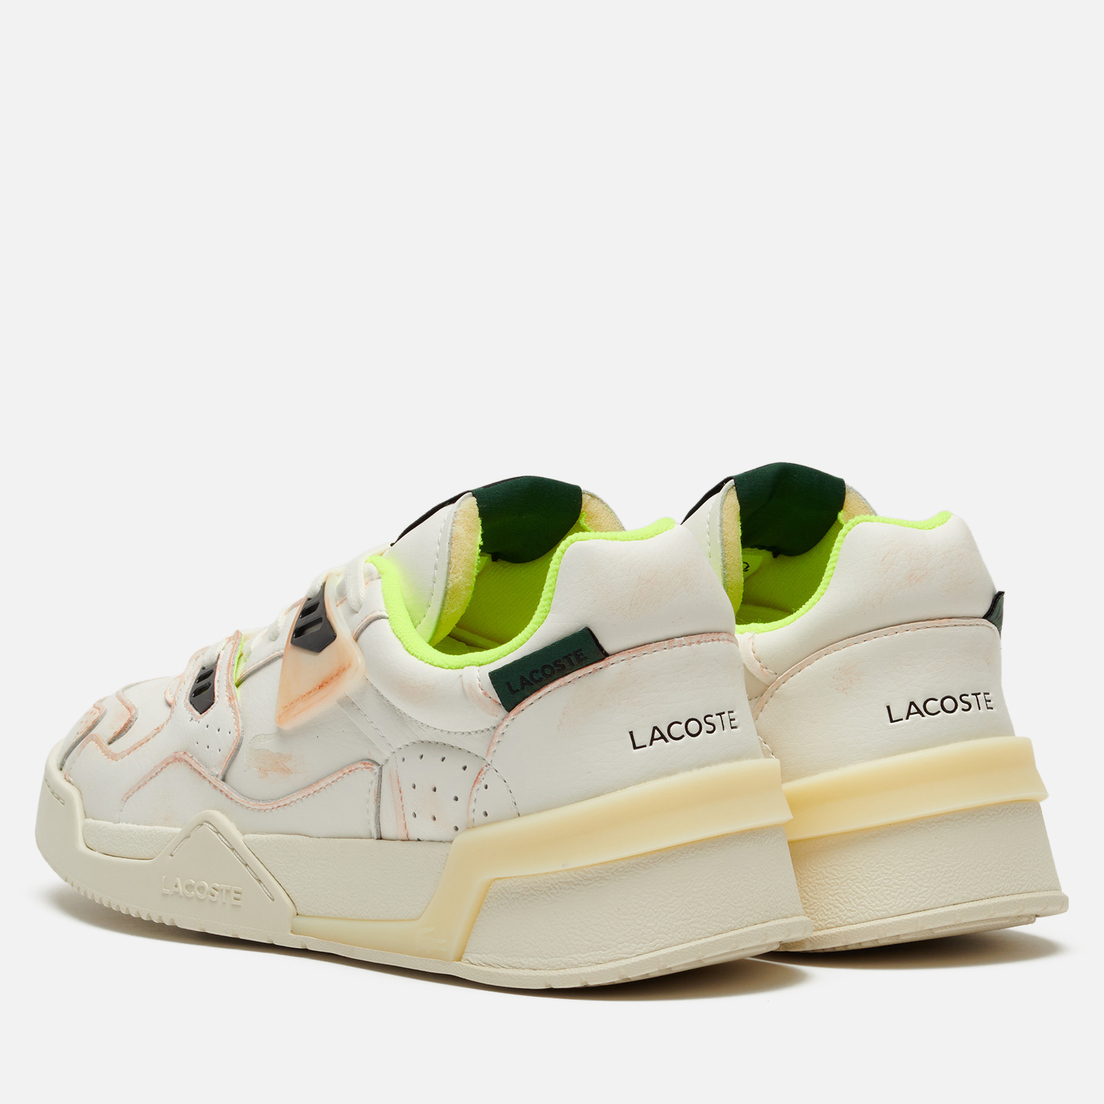 Lacoste Мужские кроссовки LT 125 Contrasted Leather